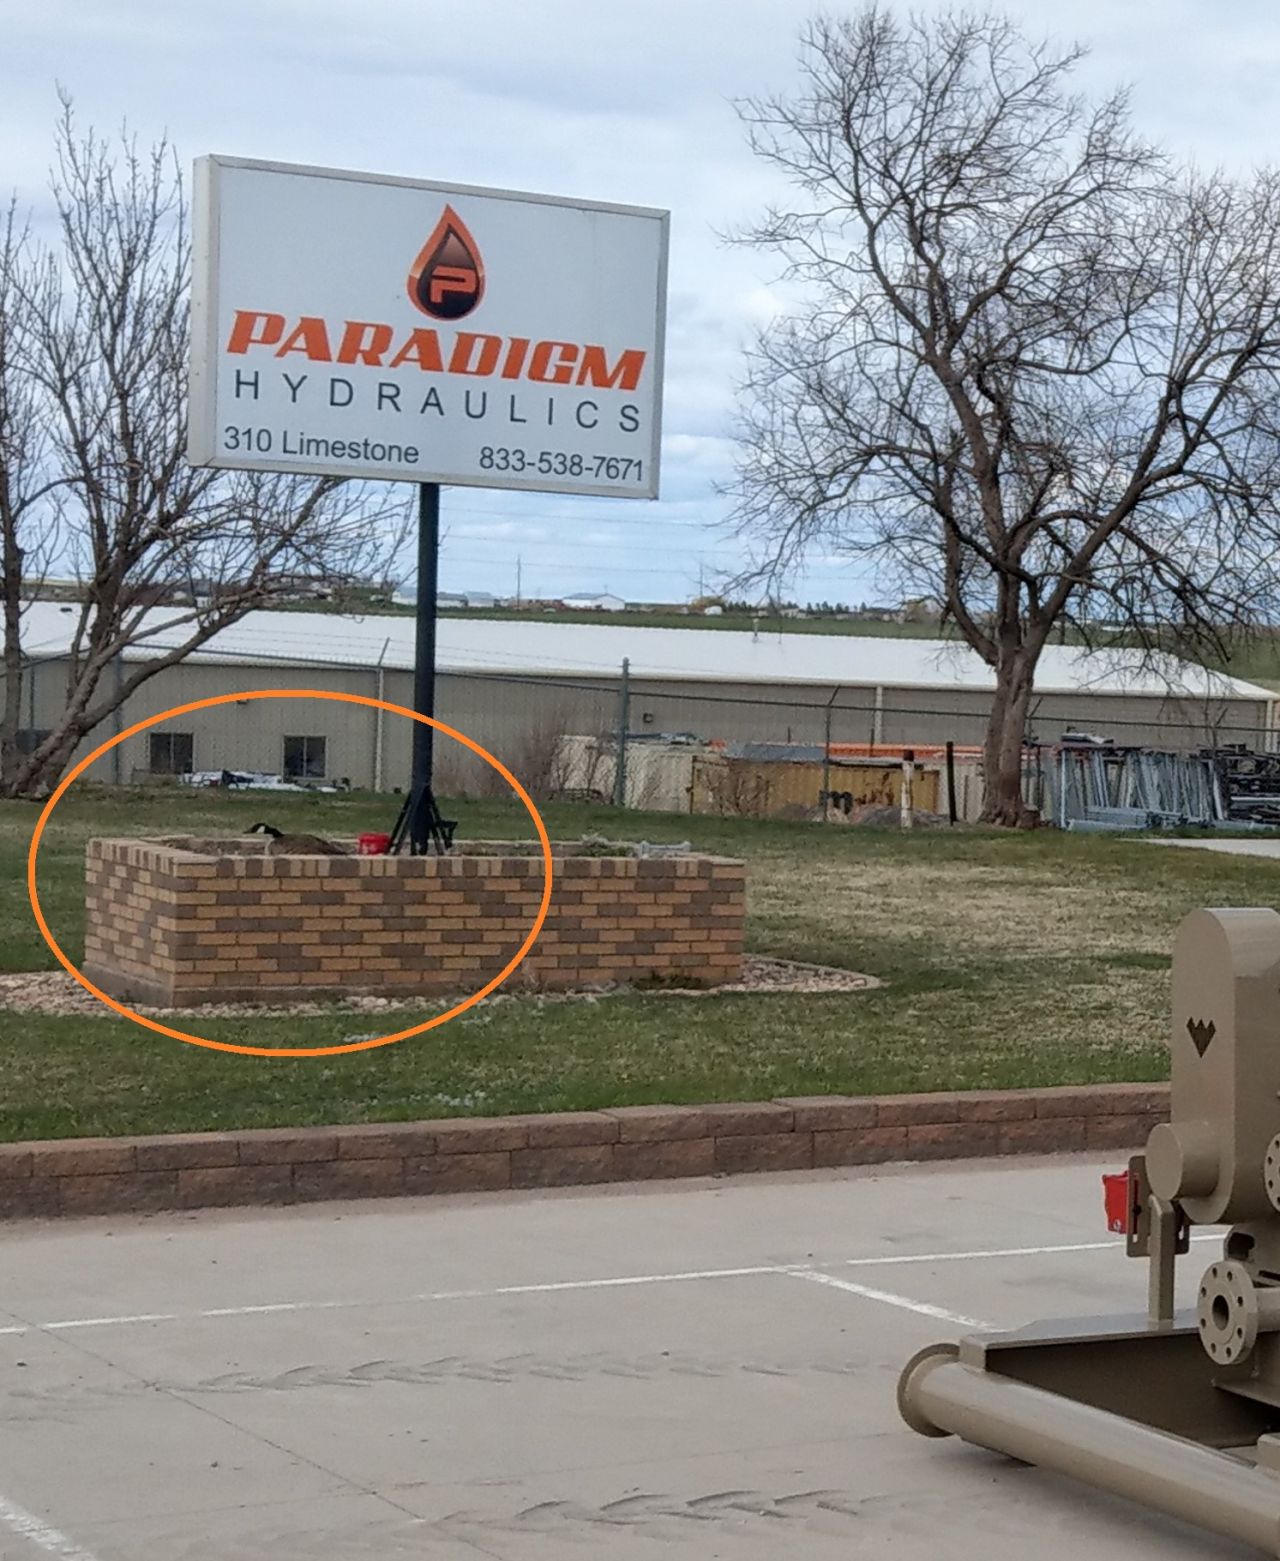 A goose nesting outside Paradigm Hydraulics Wyoming headquarters.